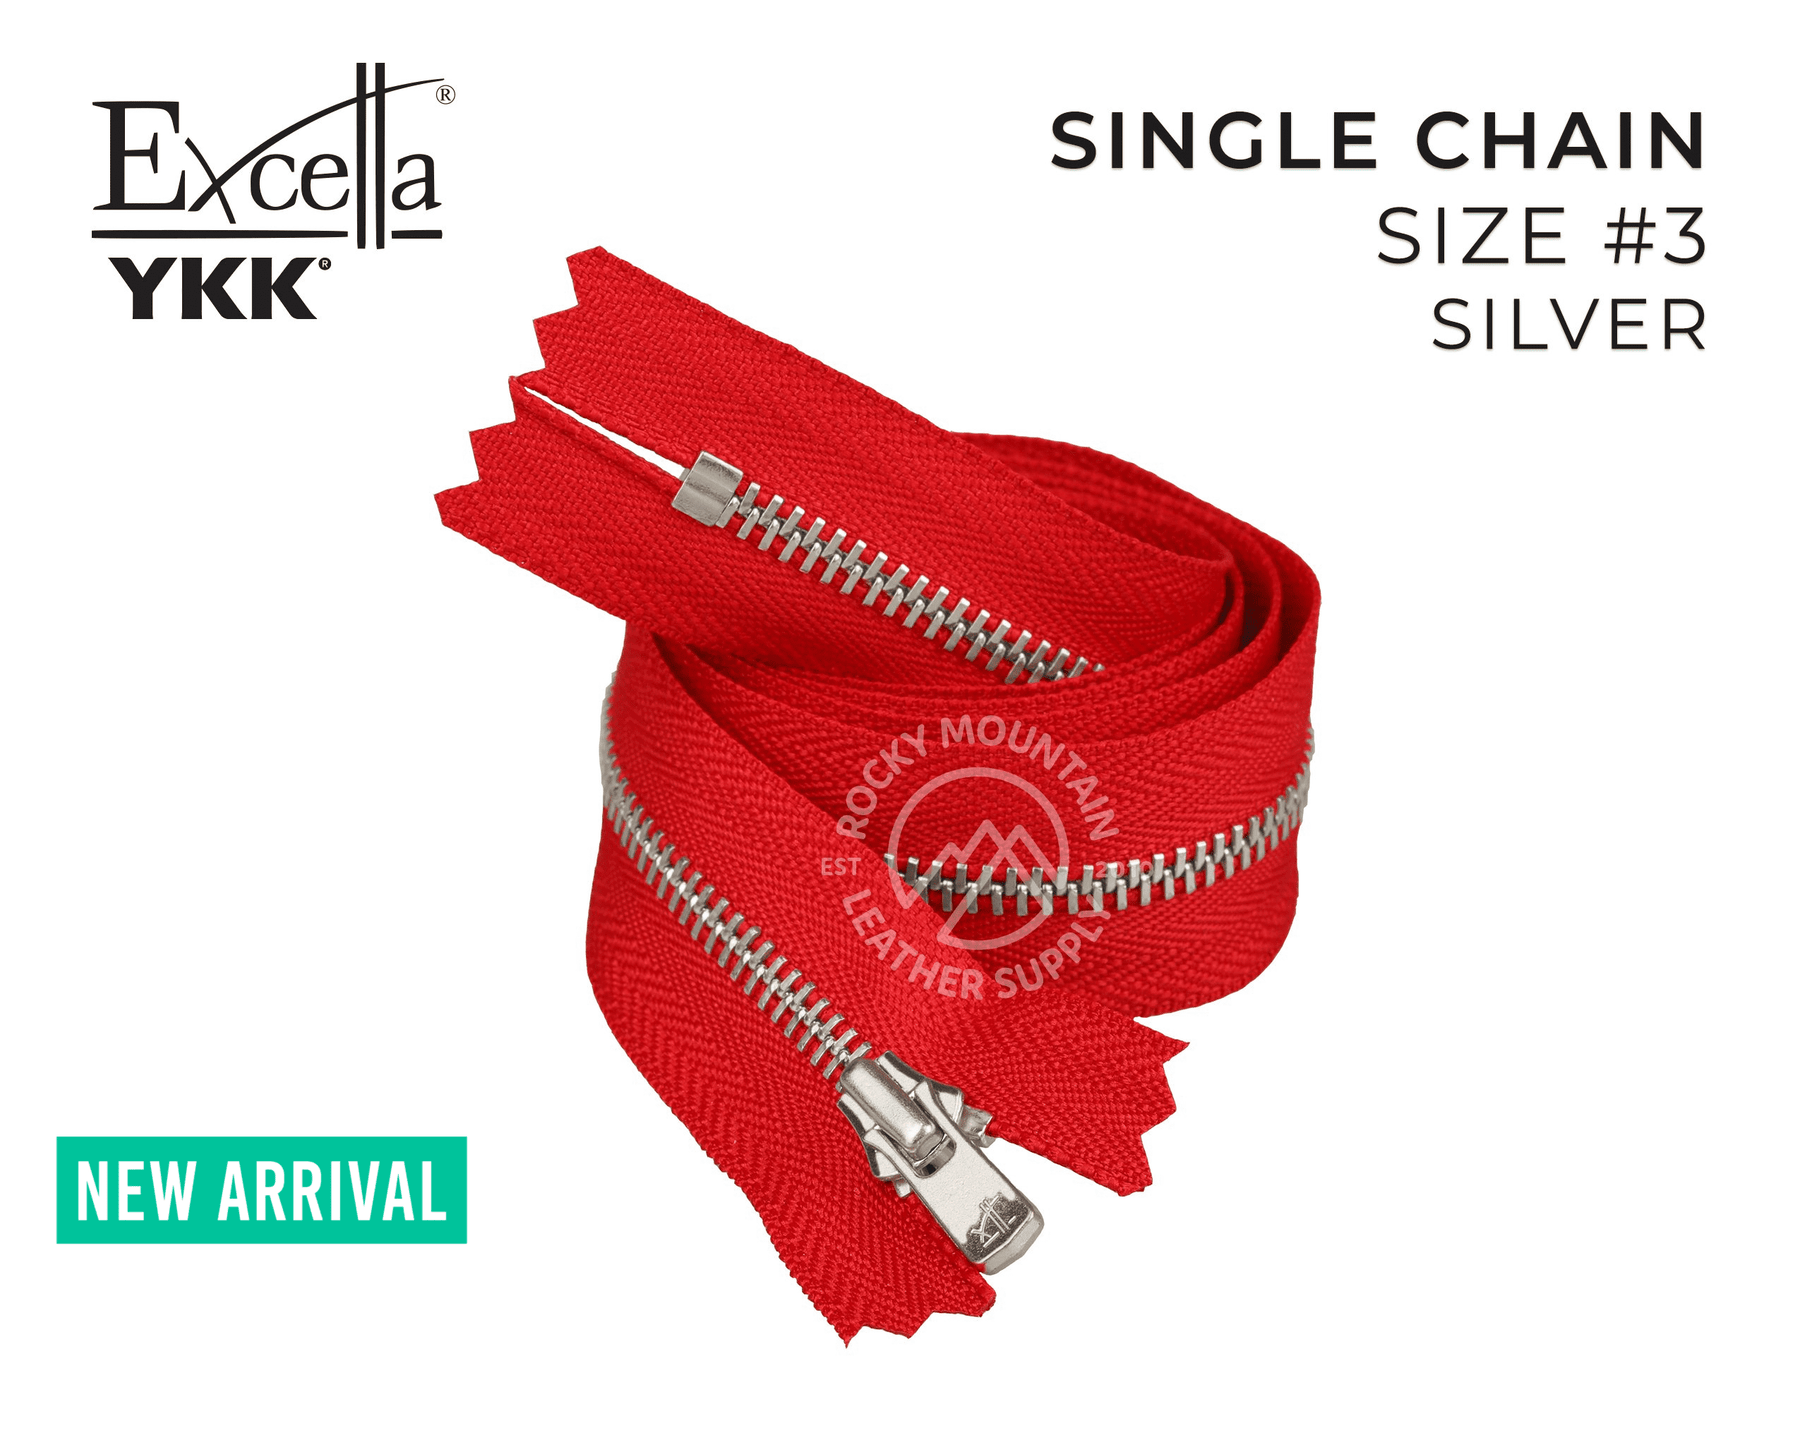 YKK Excella Zippers - Size #3 - Single Chain (Silver) - 30 inches